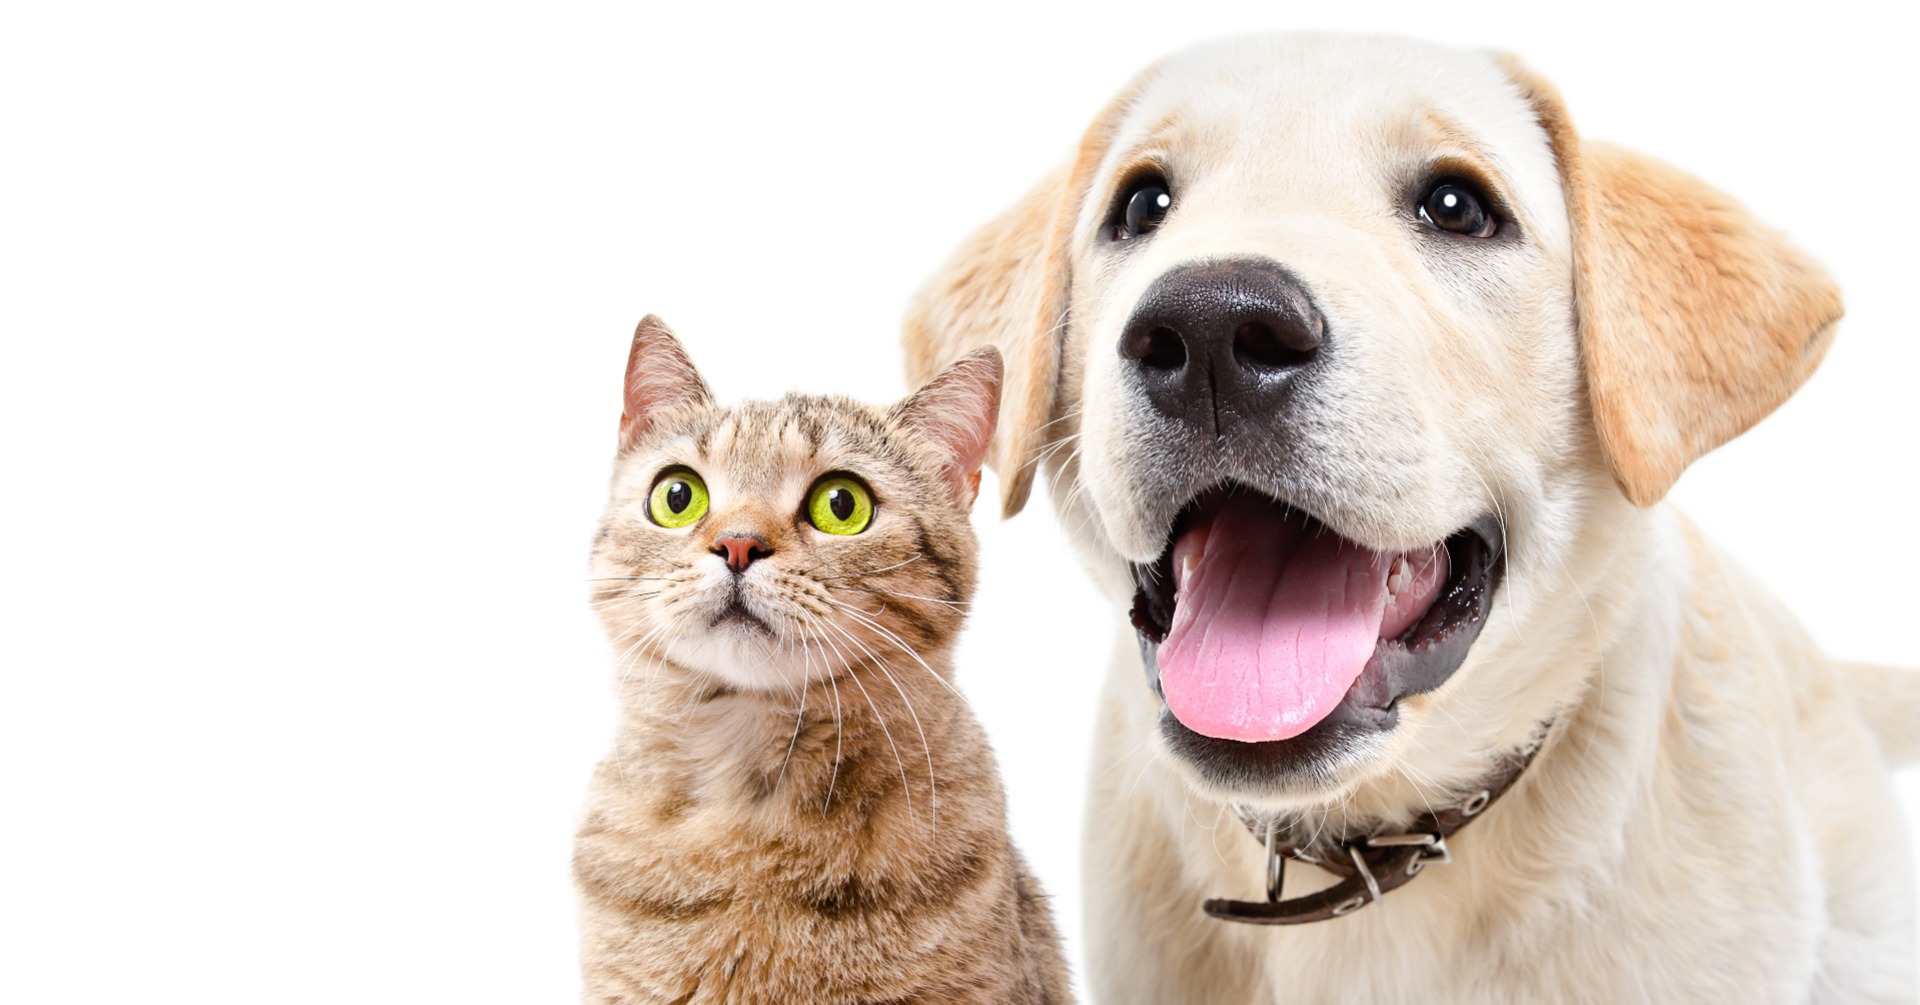 Pet Adoption On Your Mind? Use Our Handy Checklist to Prepare | NASC